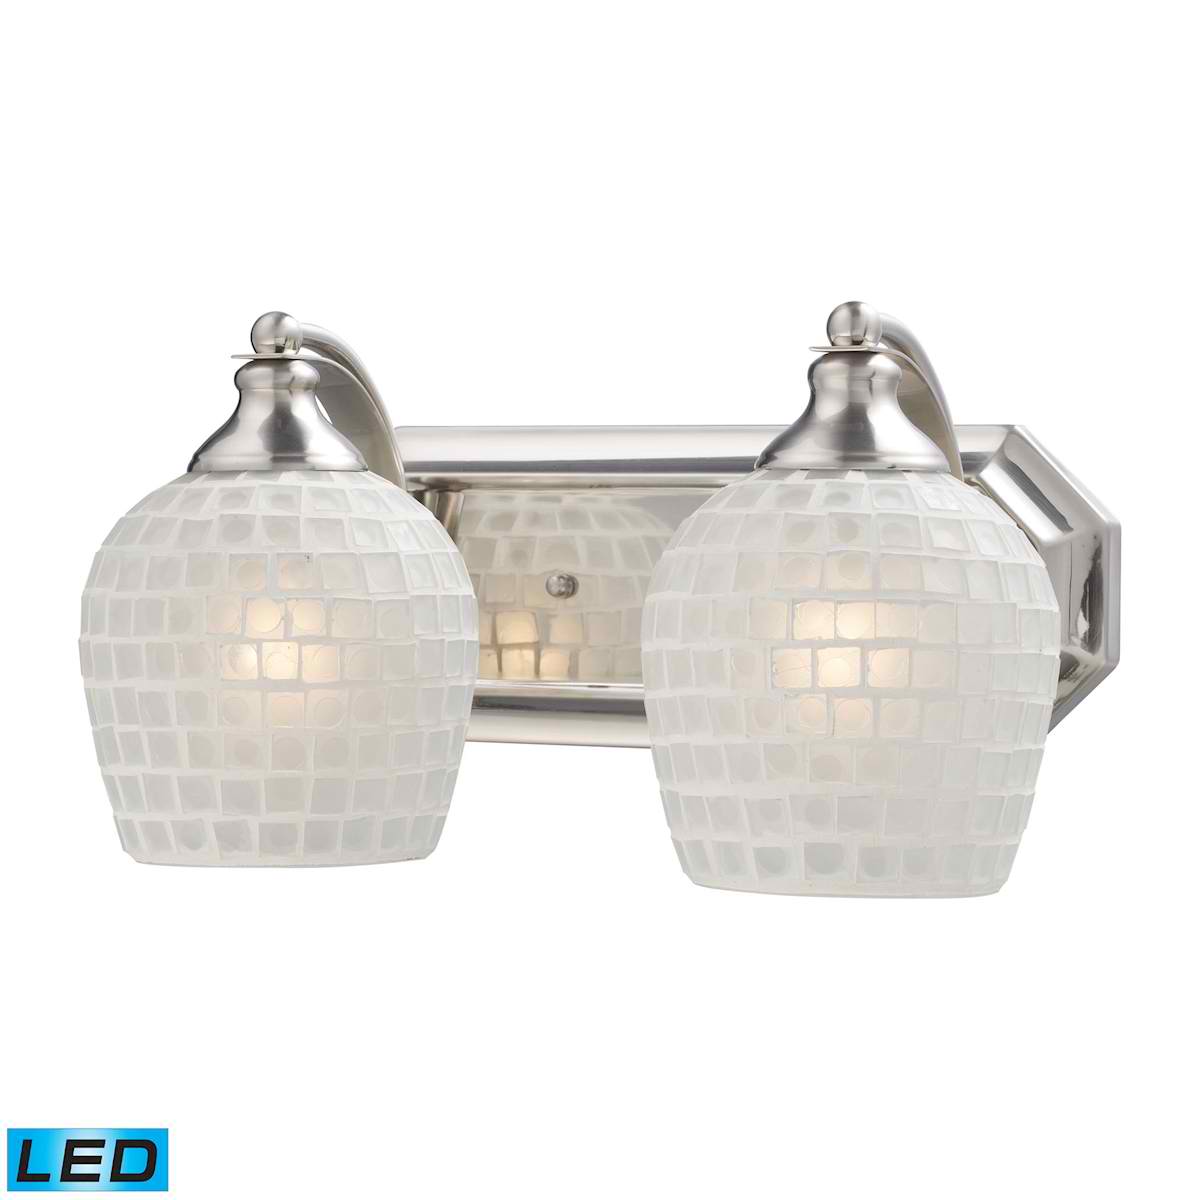 2 Light Vanity in Satin Nickel and White Mosaic Glass - LED, 800 Lumens (1600 Lumens Total) with Full Scale